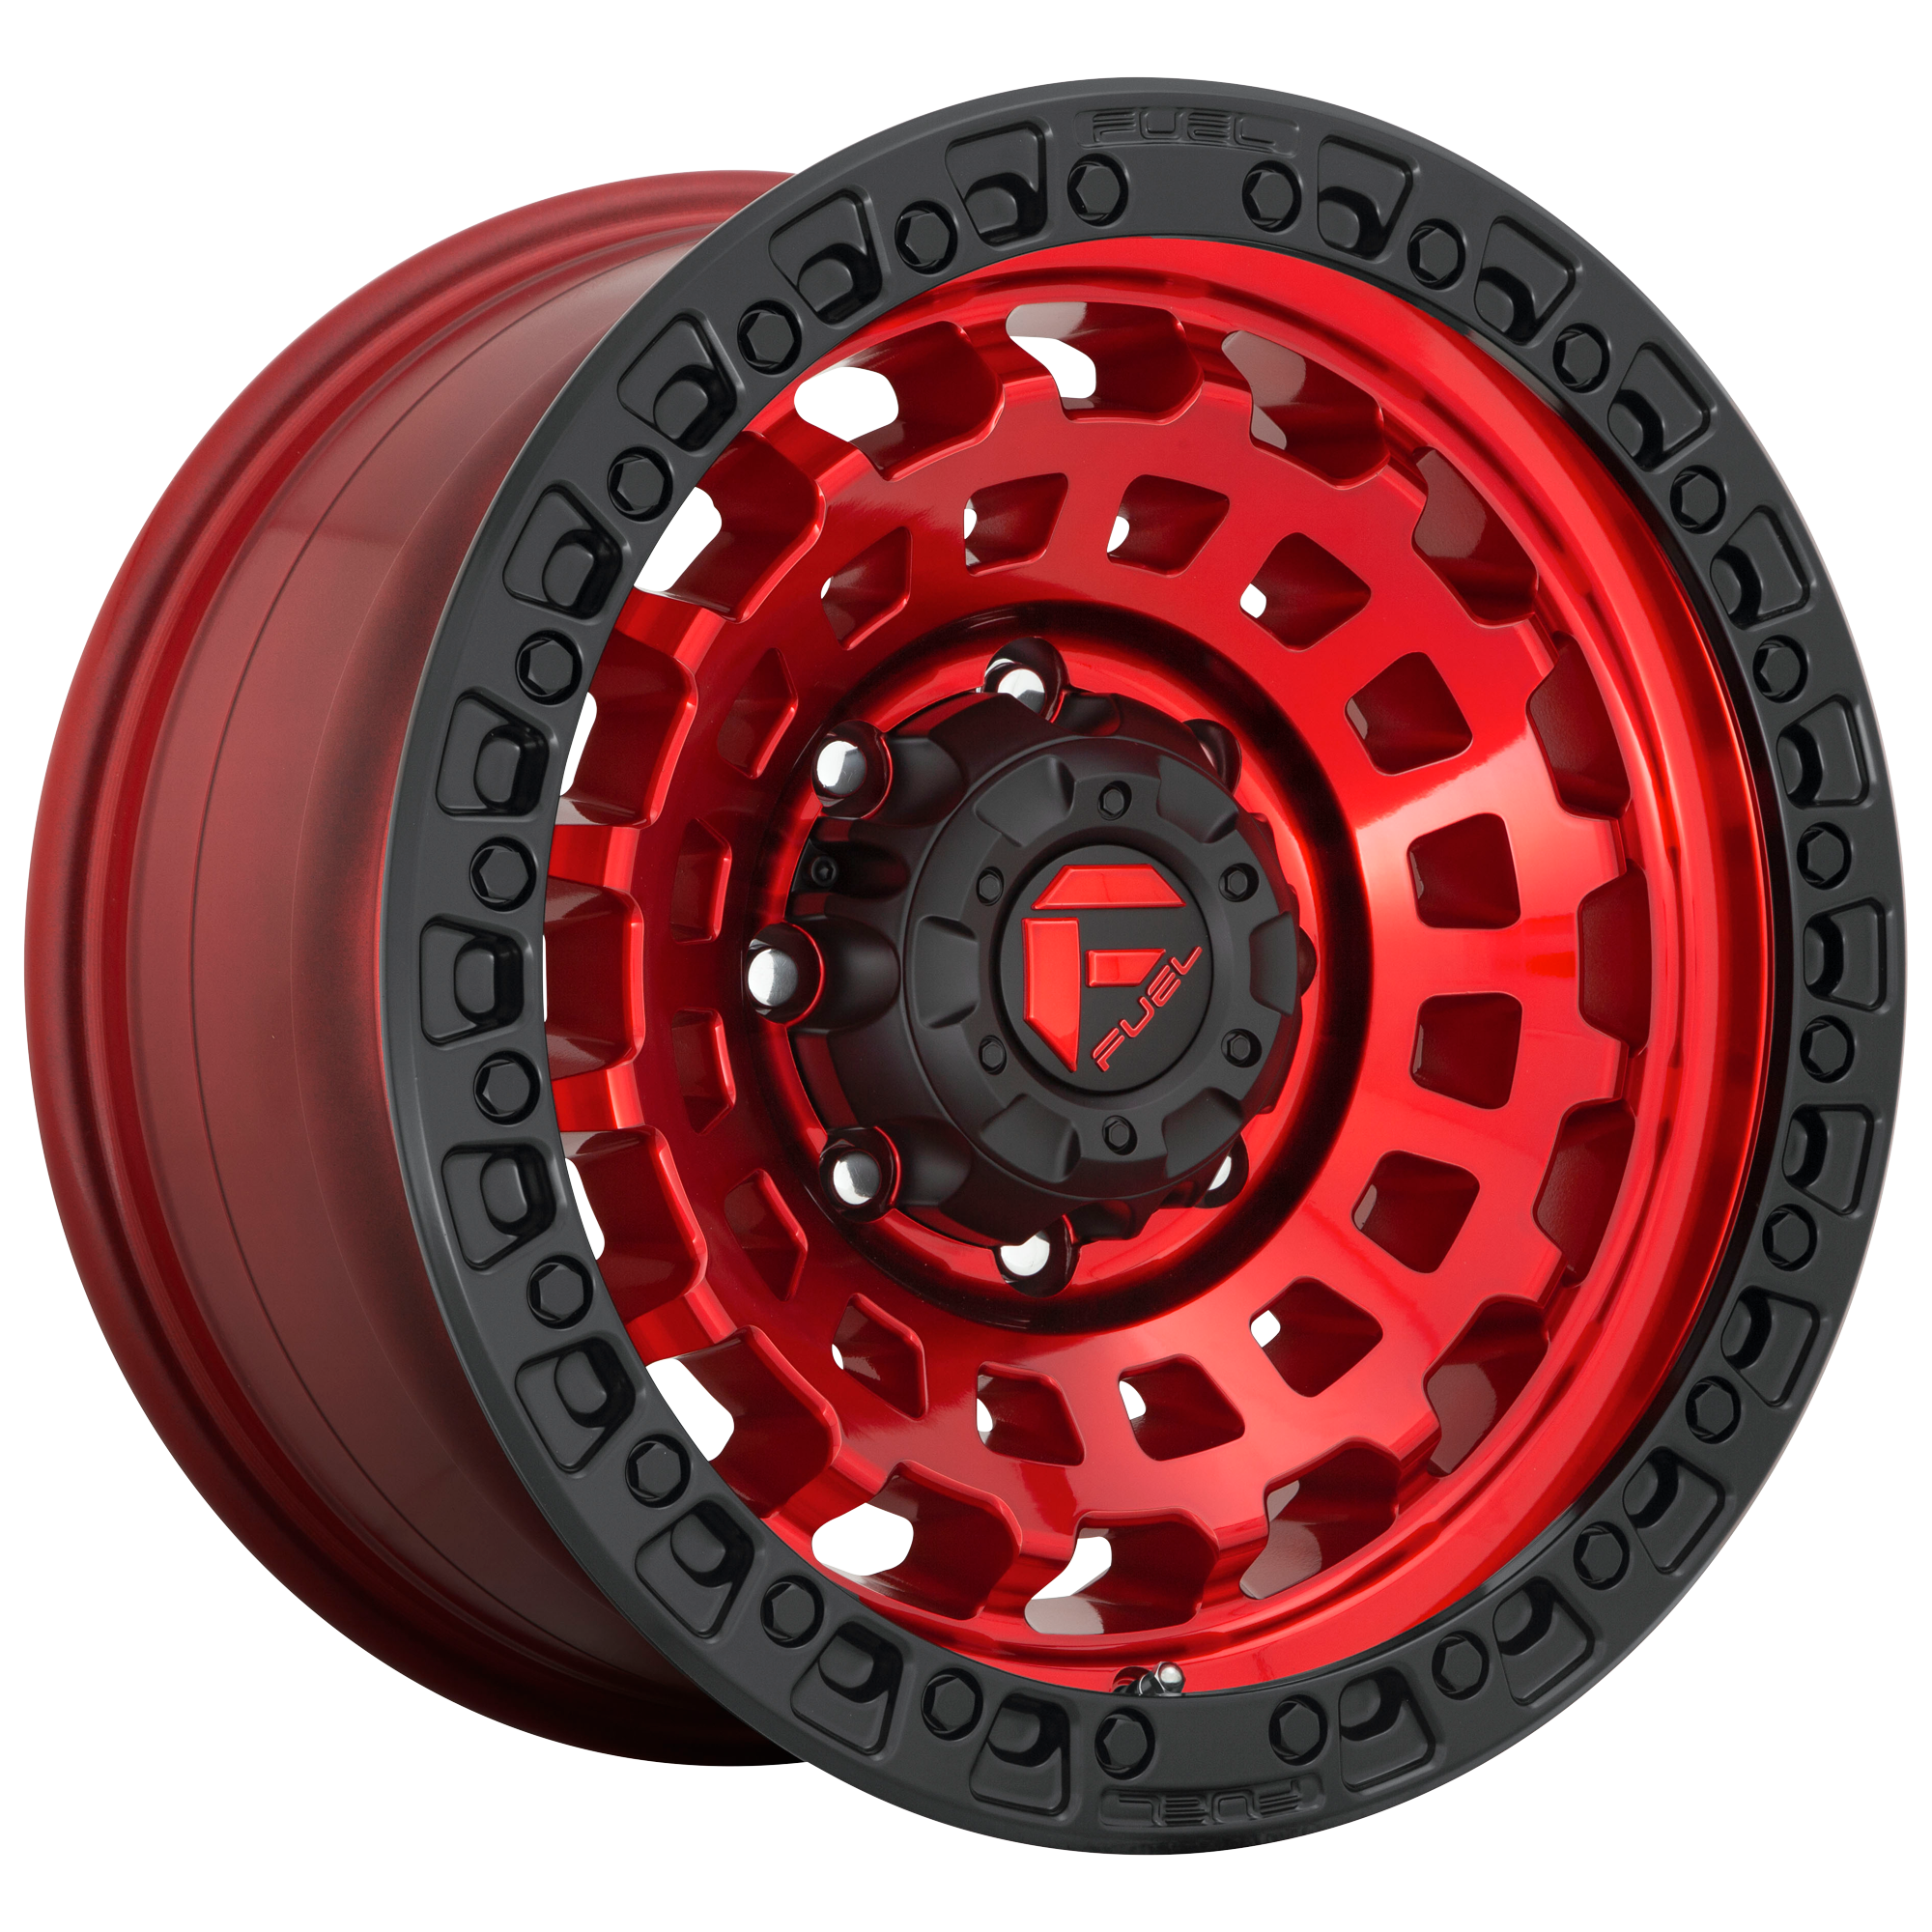 ZEPHYR 20x9 5x127.00 CANDY RED BLACK BEAD RING (1 mm) - Tires and Engine Performance